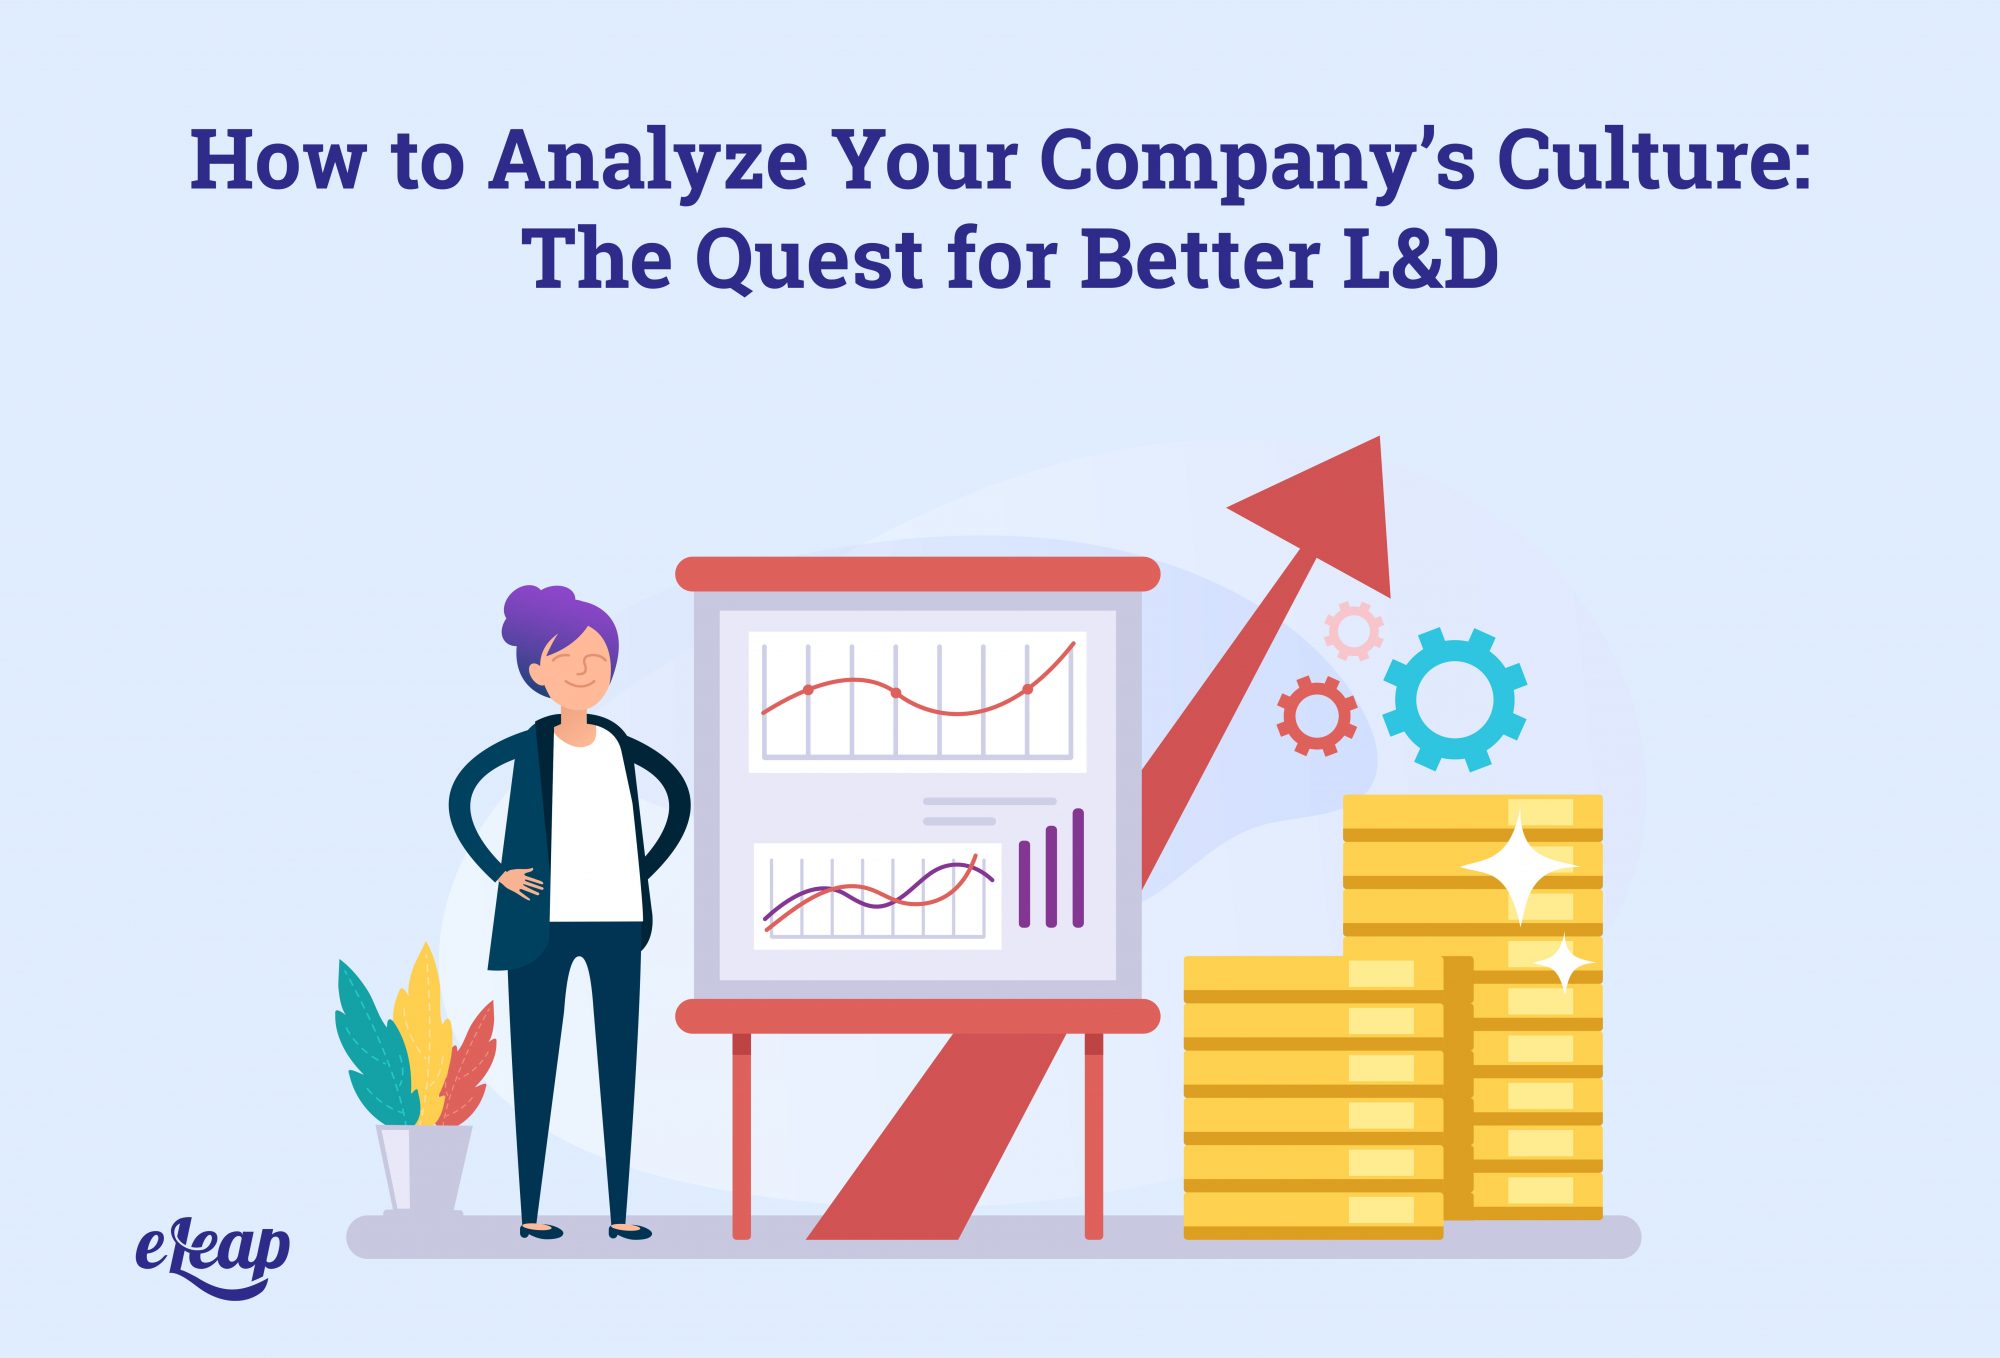 How to Analyze Your Company’s Culture: The Quest for Better L&D